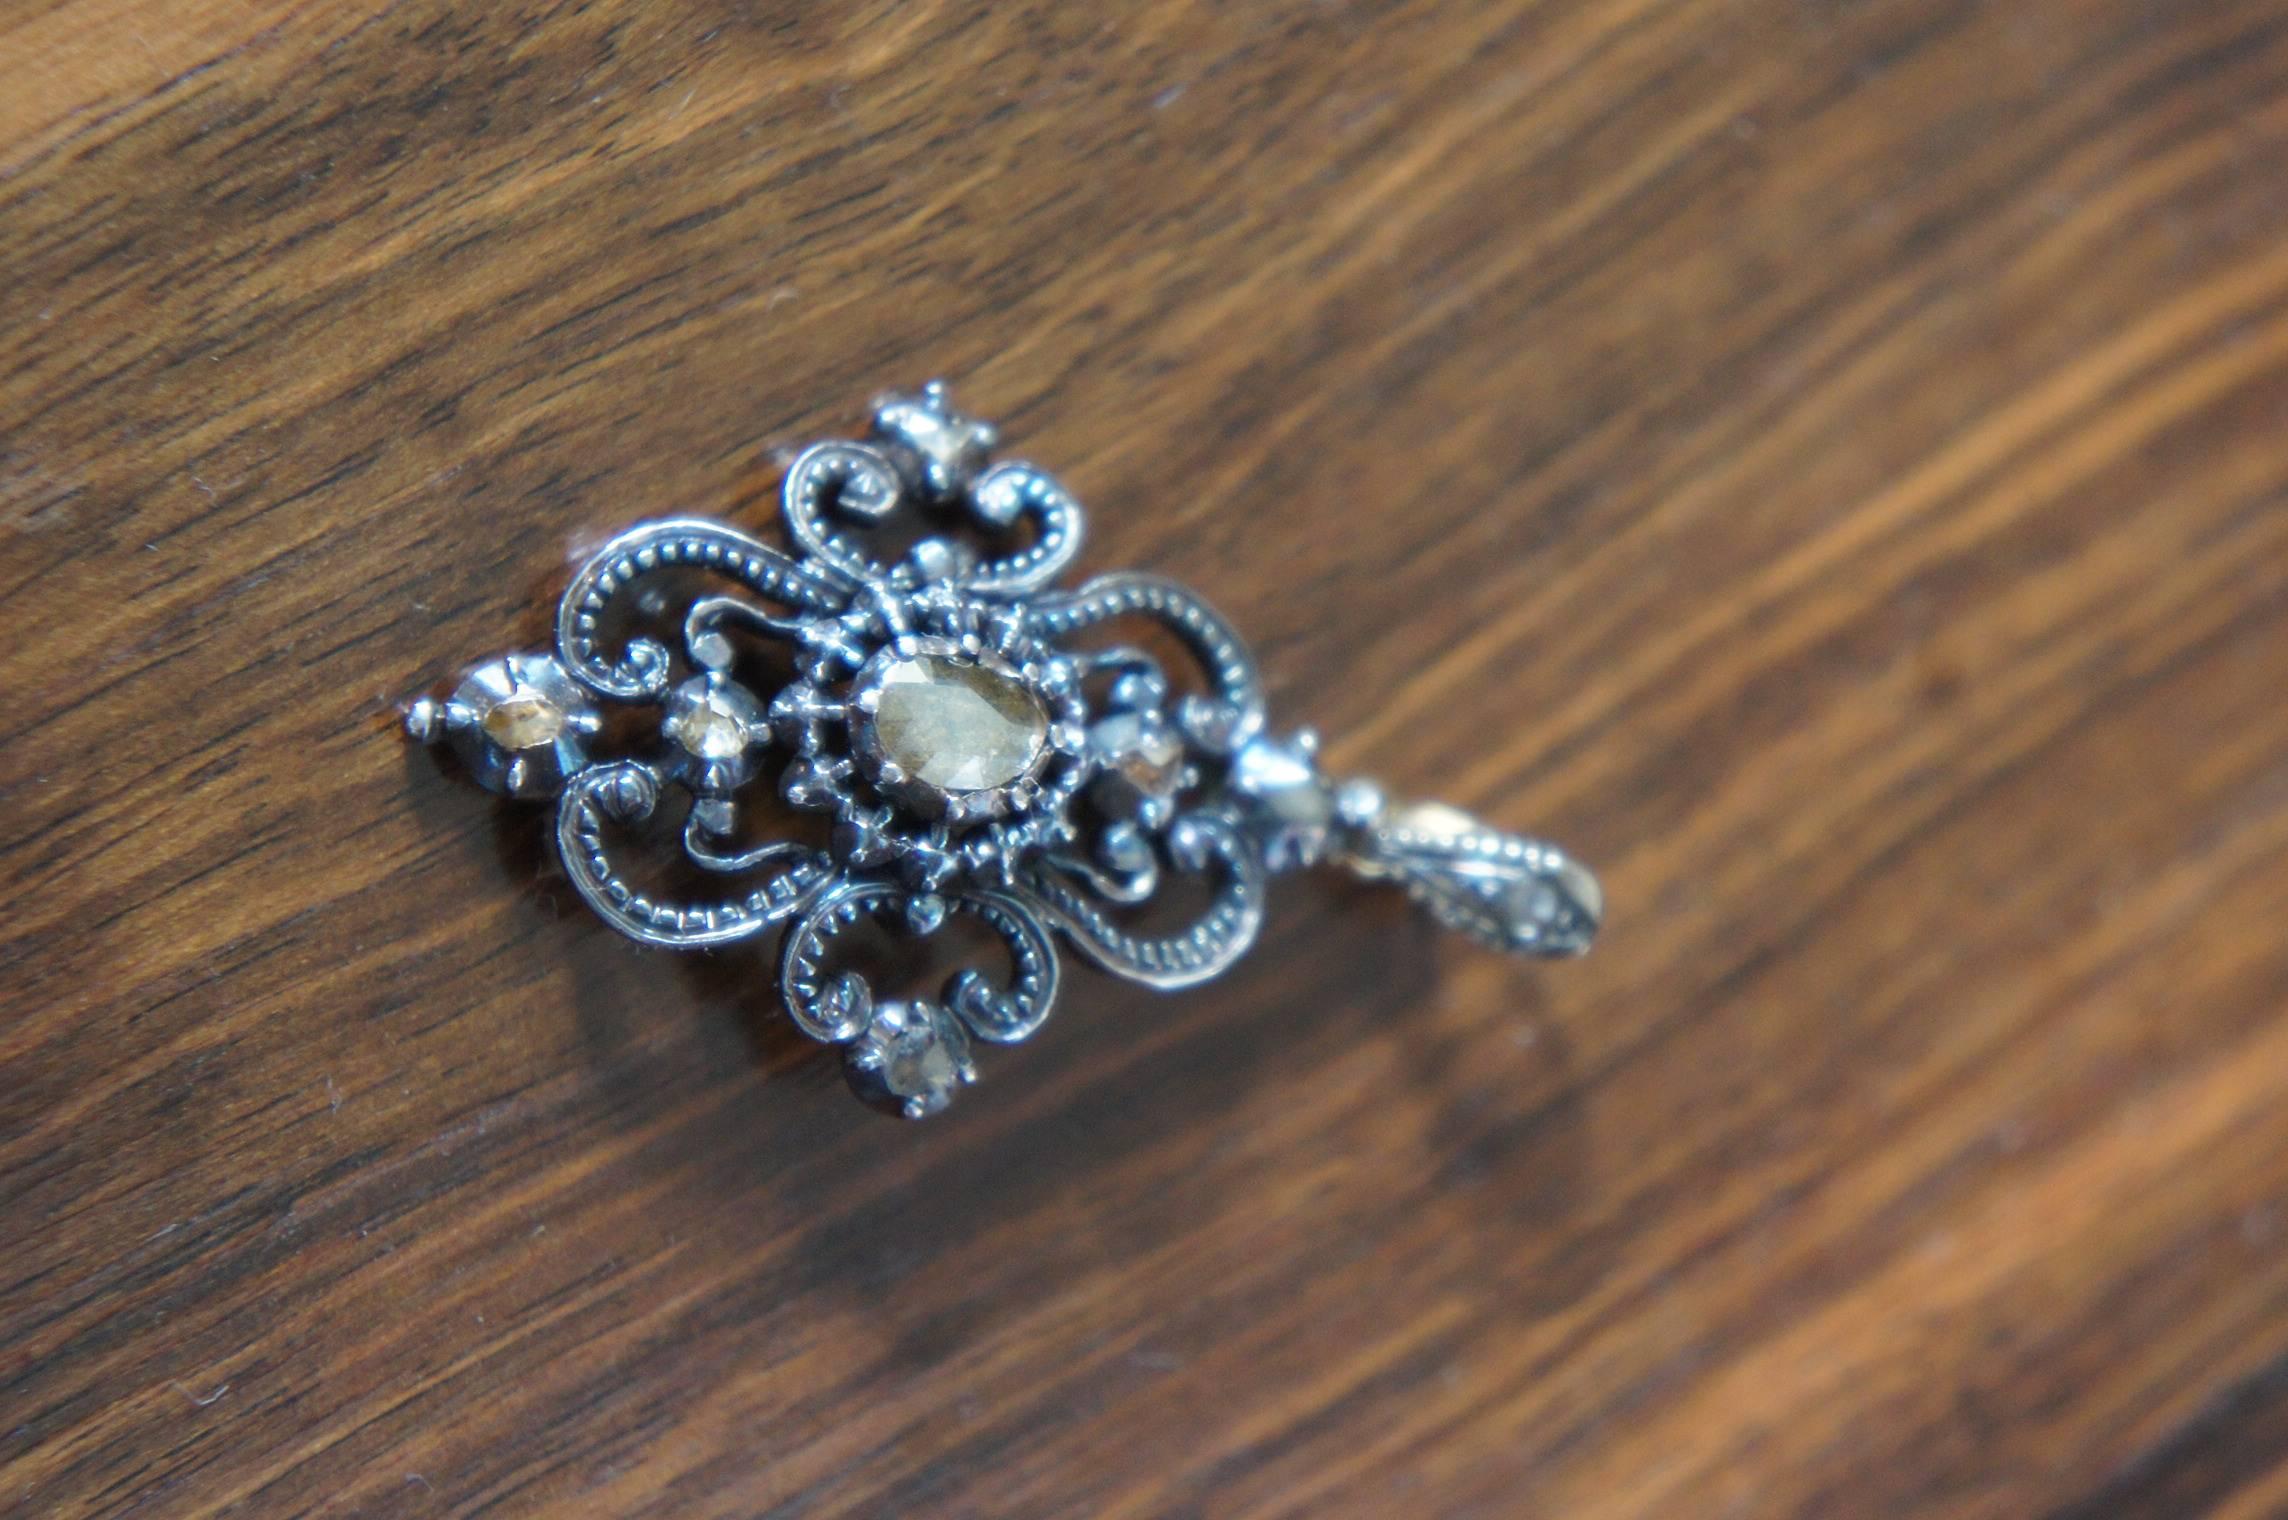 Late 19th century jewelry, another great gift to give.

We recently acquired a group of early 20th century and also some older pieces of jewelry. We are no experts in this field, but we learned that this is a late 19th century, silver pendant with